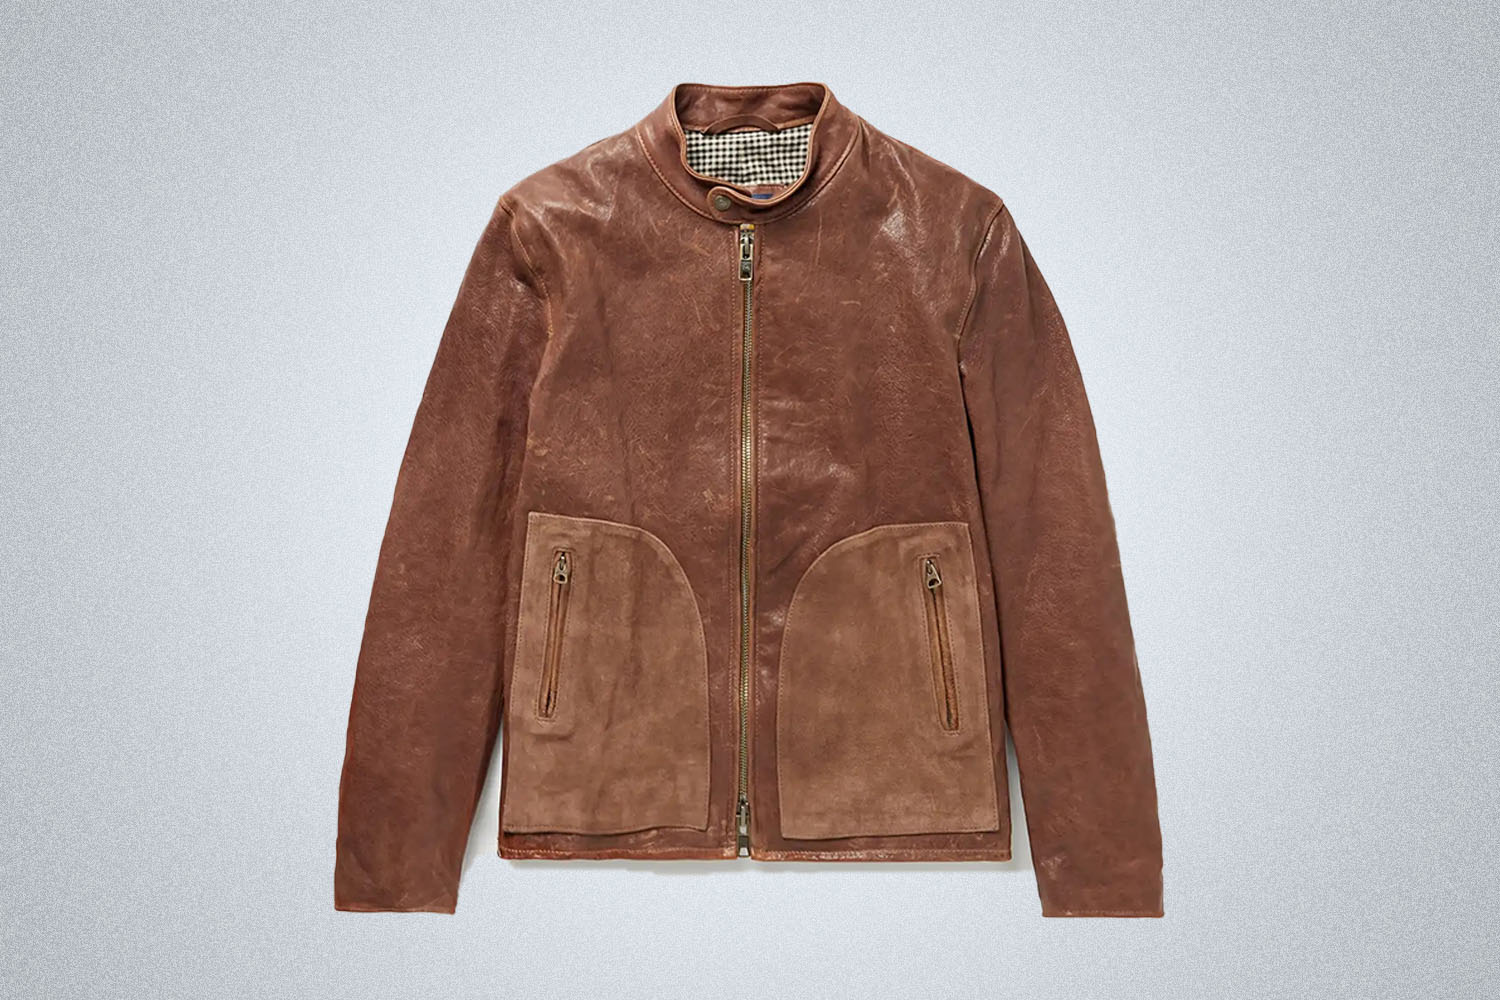 A Schott brown leather jacket from Mr. Porter on a grey background